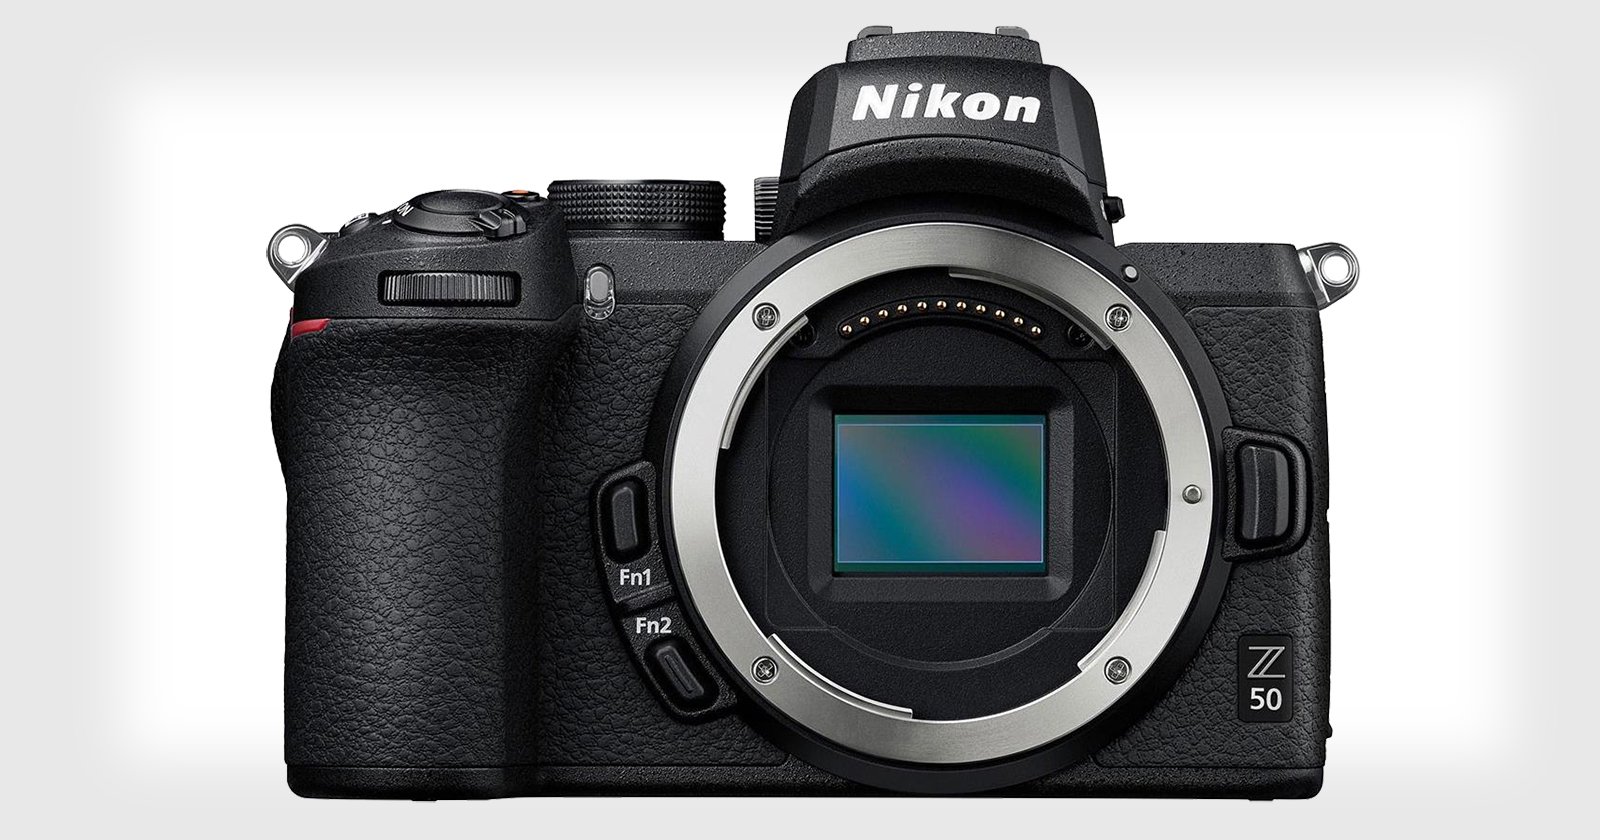 Nikon Confirms that the Z50 Does NOT Have Image Sensor Cleaning